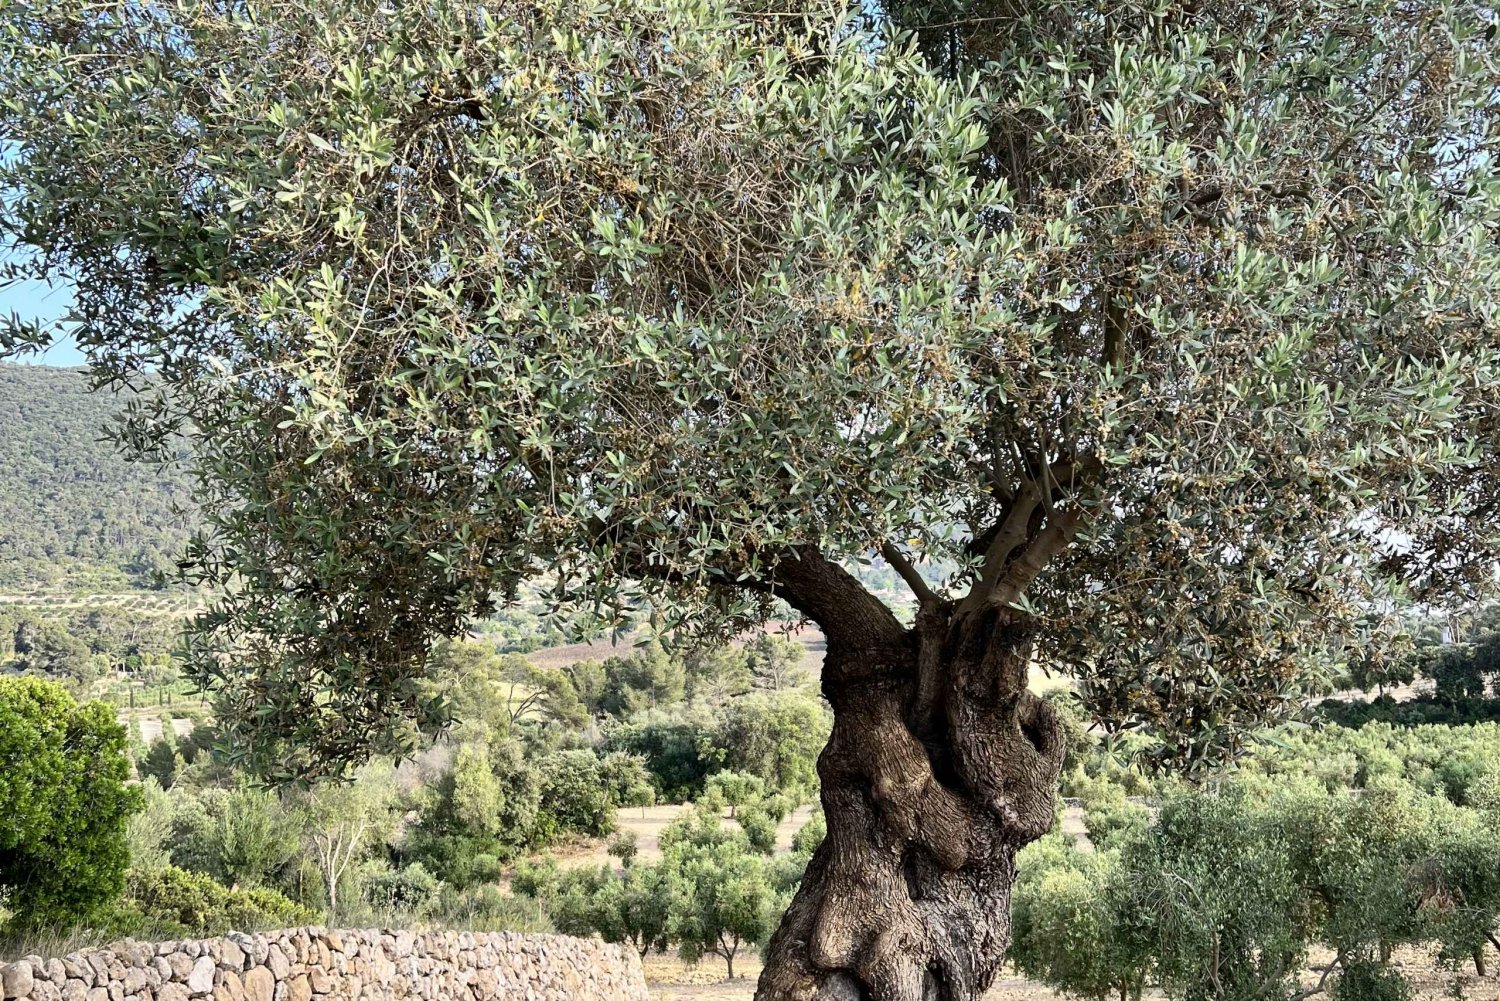 Mallorca Flavours Tour: Oranges, olive oil and wine